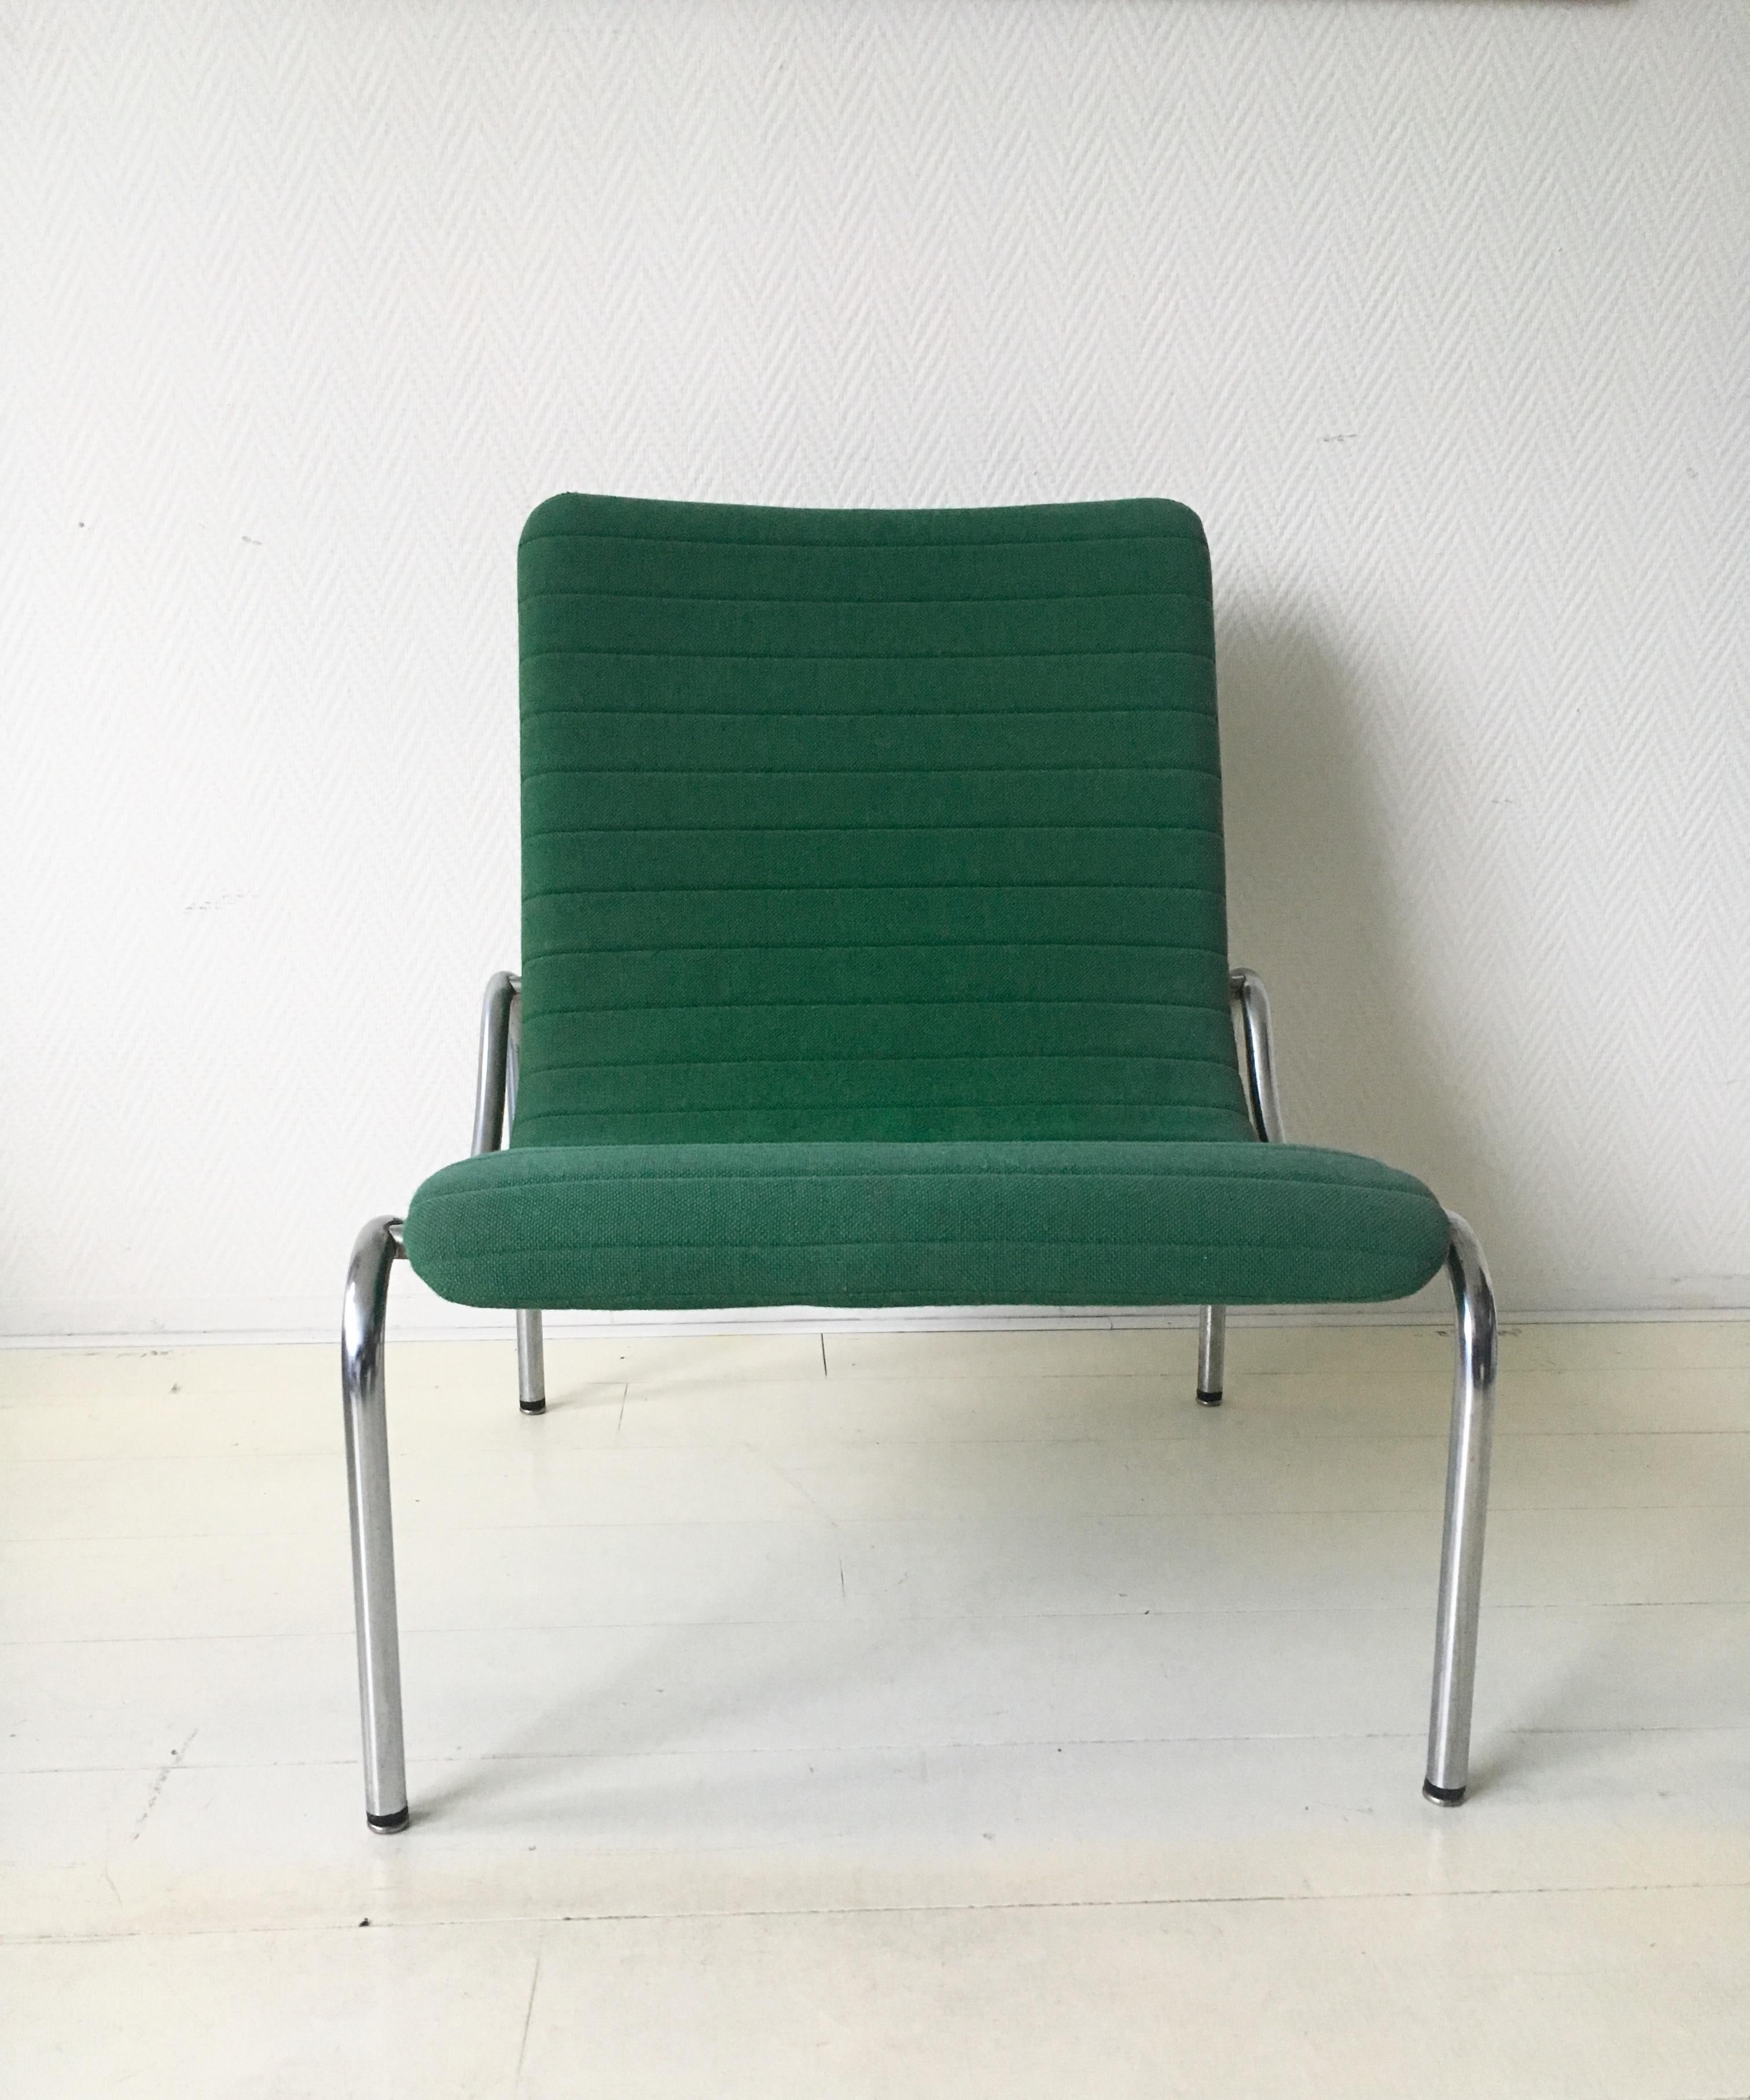 Mid-Century Modern Green Tubular Lounge Chair by Kho Liang Ie for Stabin Holland, Model 703, 1968 For Sale